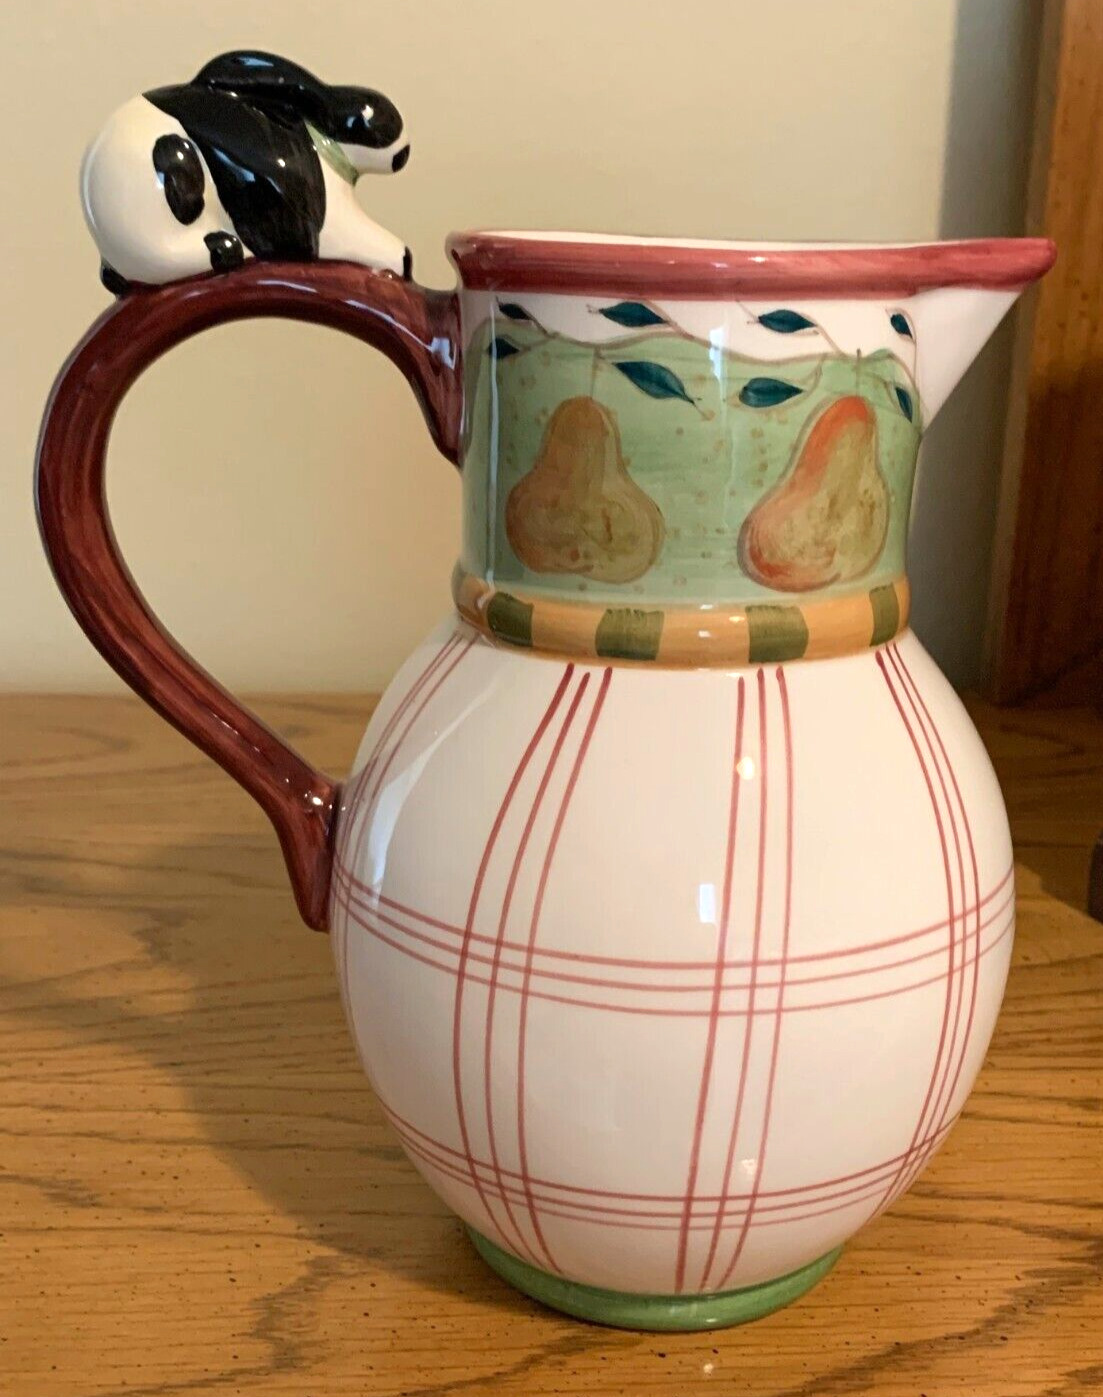 Unique Ceramic Hand Painted Pitcher With Pears and Rabbit on Handle